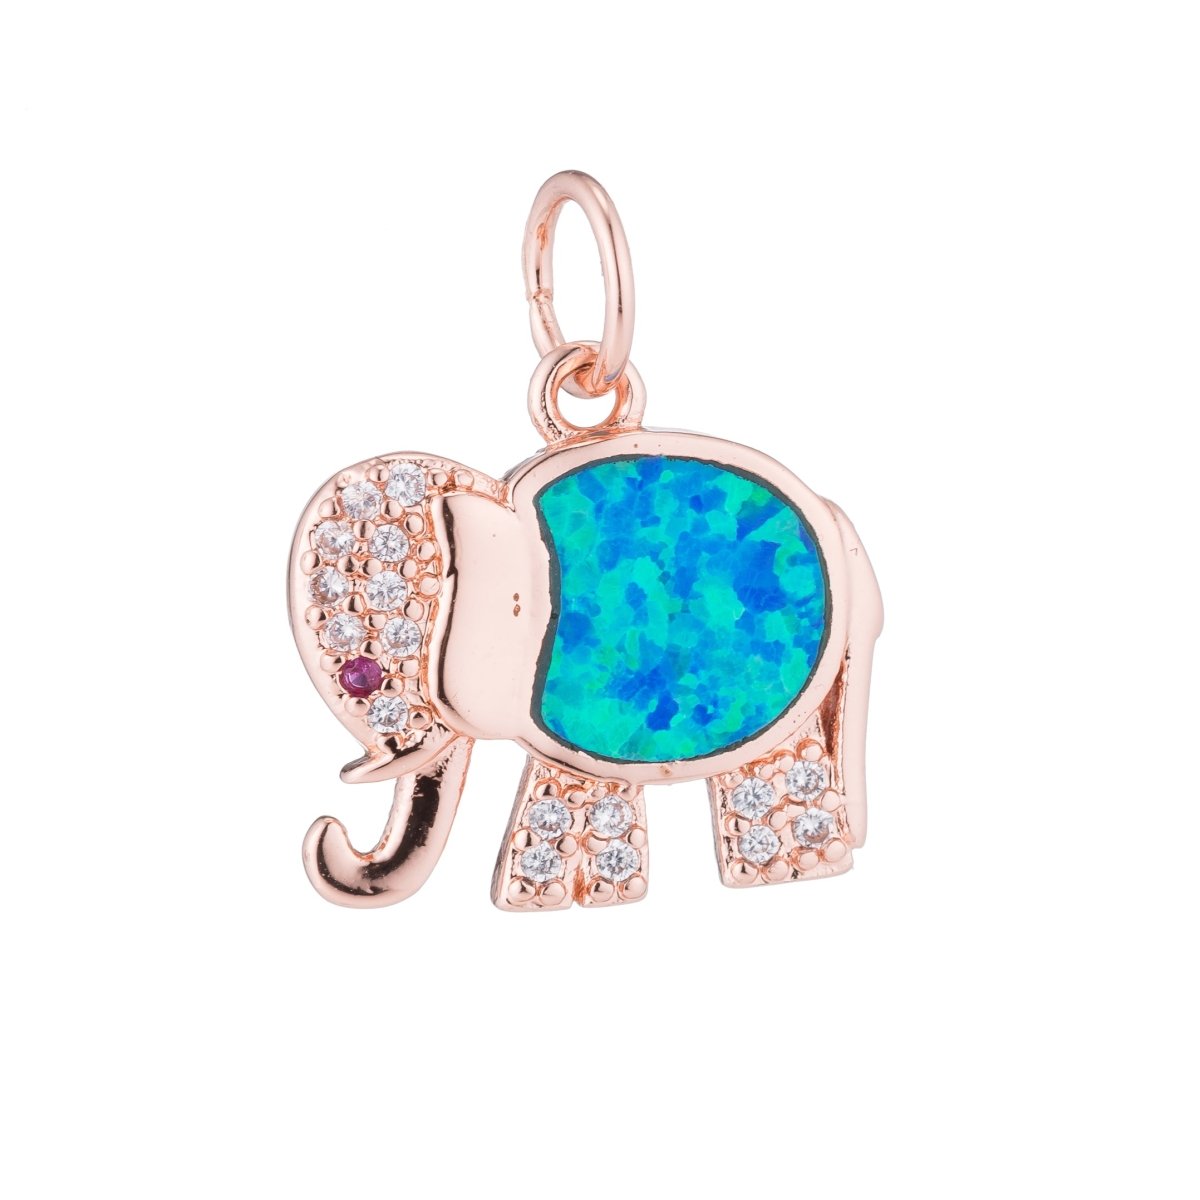 OS 1pc Cute Gold Elephant, Green Opal, Animal Lover Nature Gift Cubic Zirconia Bracelet Charm Bead Necklace Pendant Finding for Jewelry Making, C-259 - DLUXCA